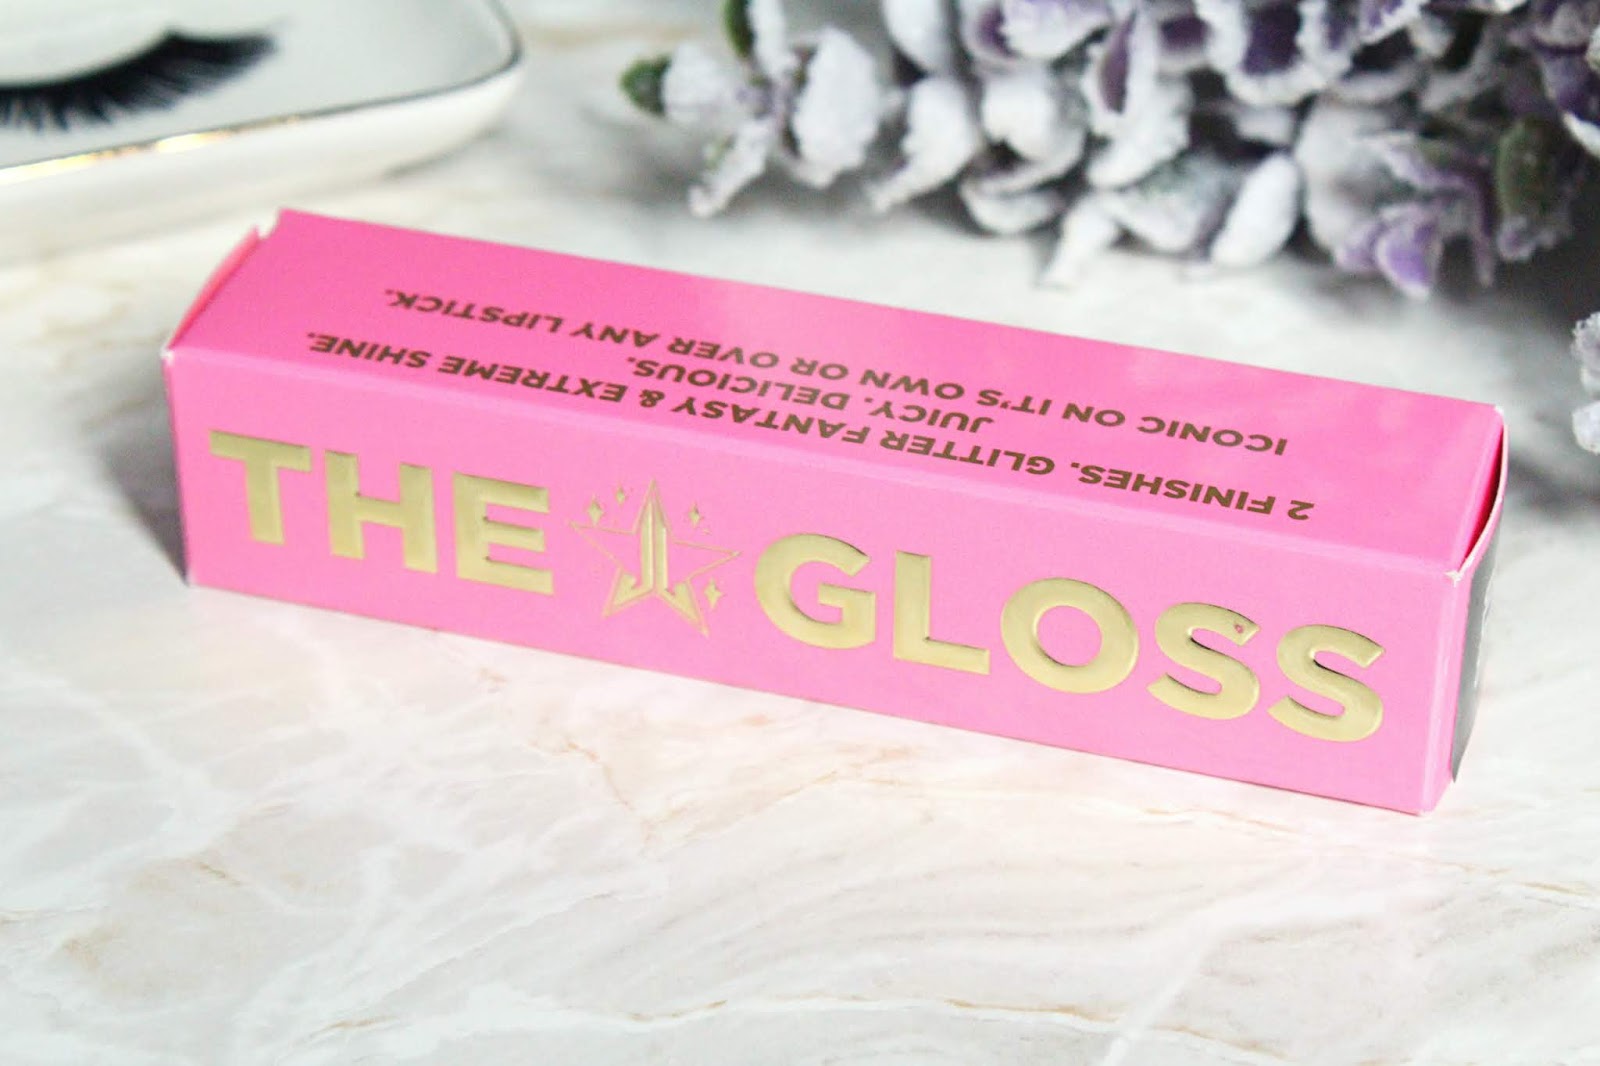 Jeffree Star Cosmetics The Gloss Review 